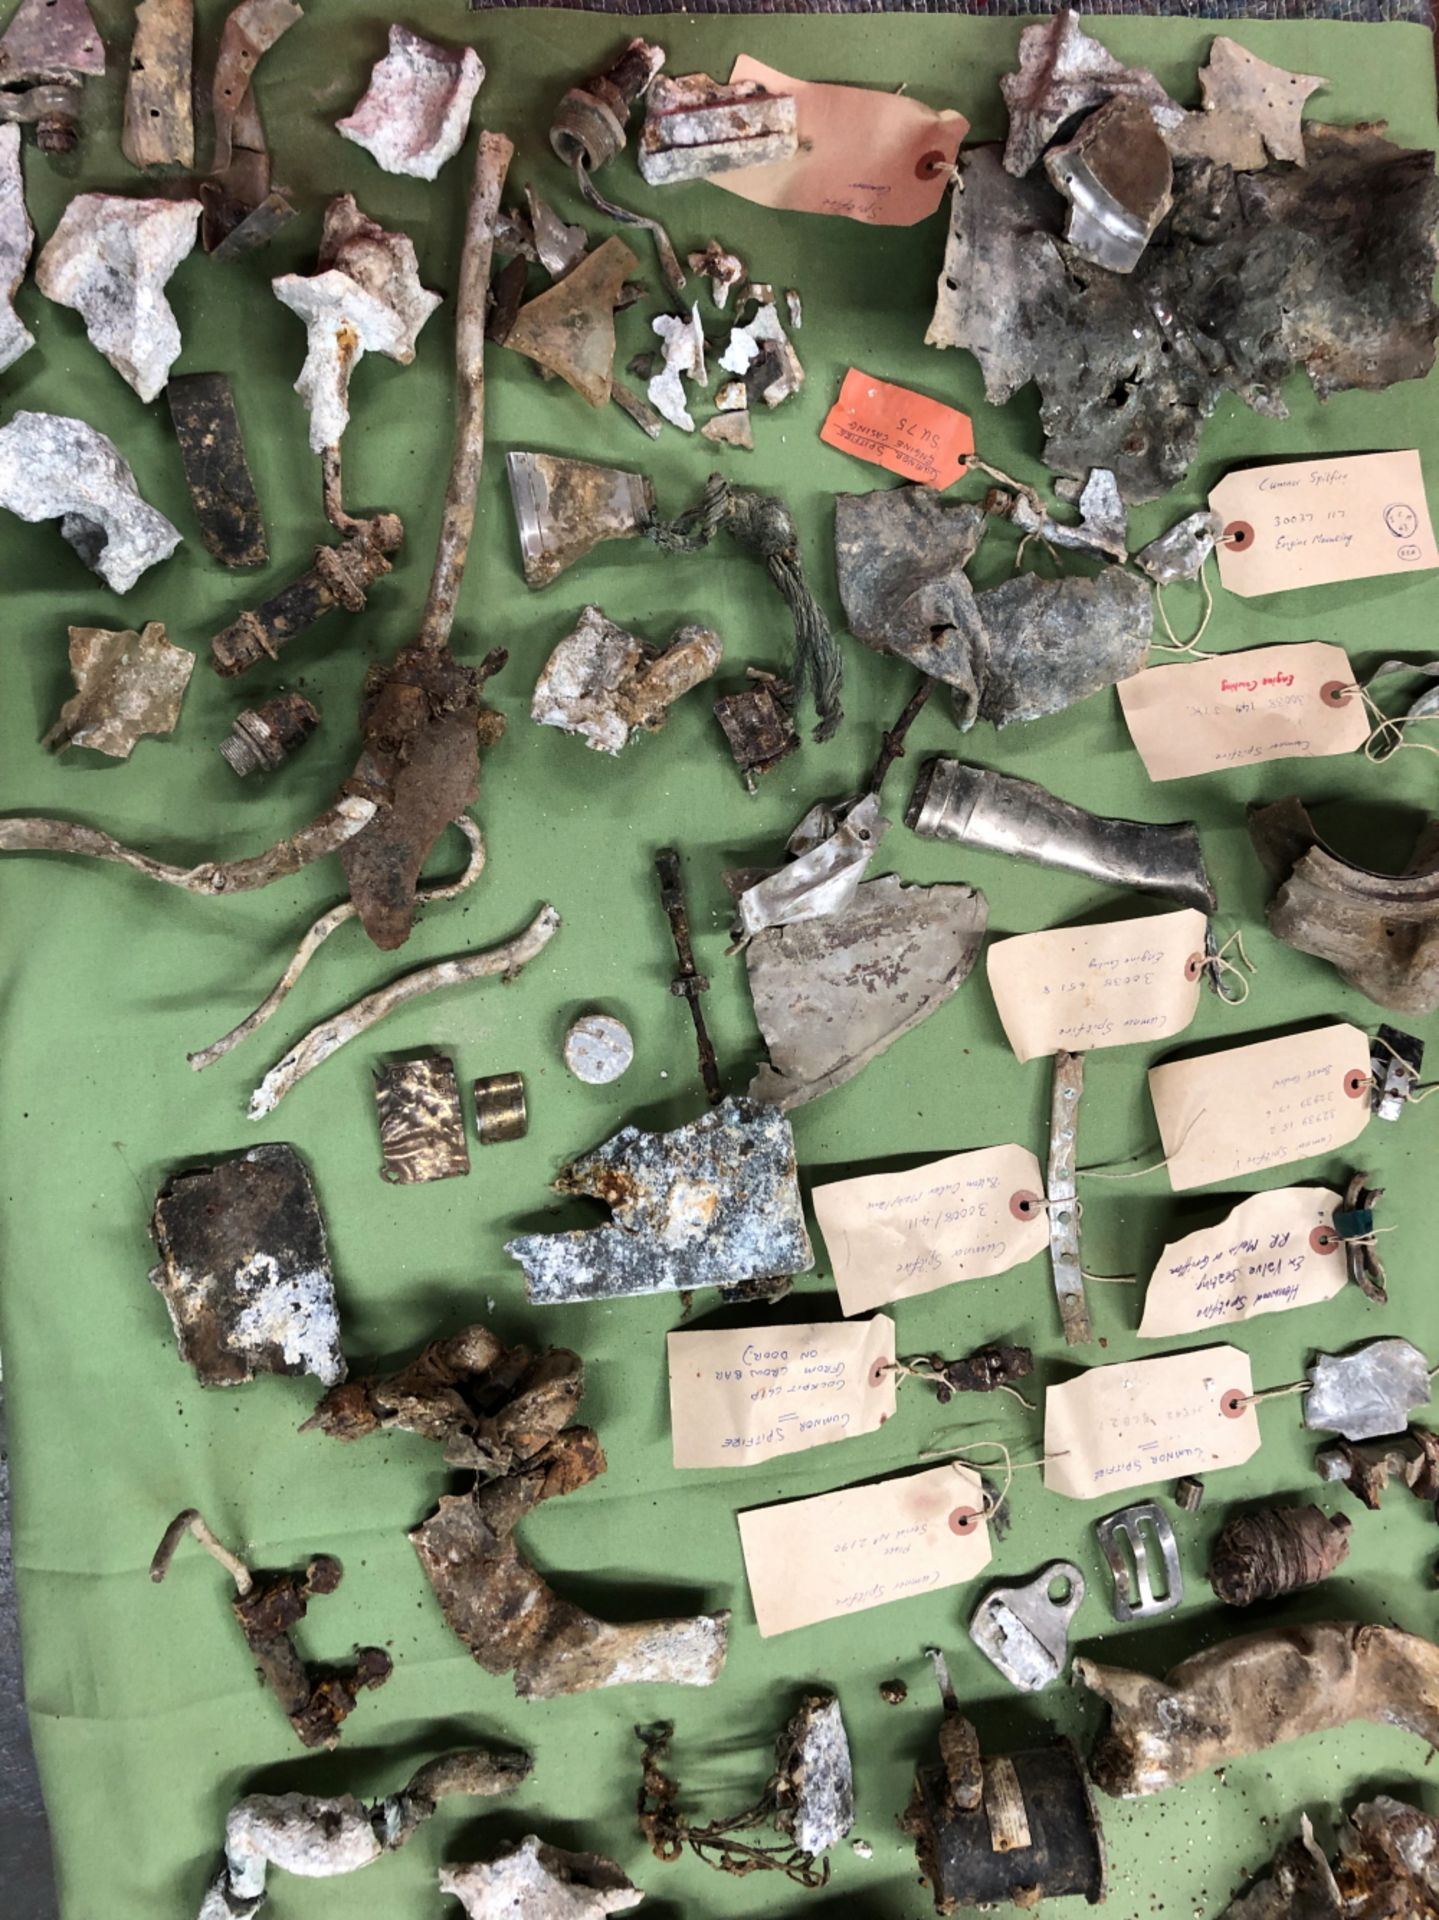 THE DOUG CUTHBERTSON COLLECTION- AIRCRAFT WRECKAGE. CRASH RECOVERED PARTS FROM AIRCRAFT "SPITFIRE"